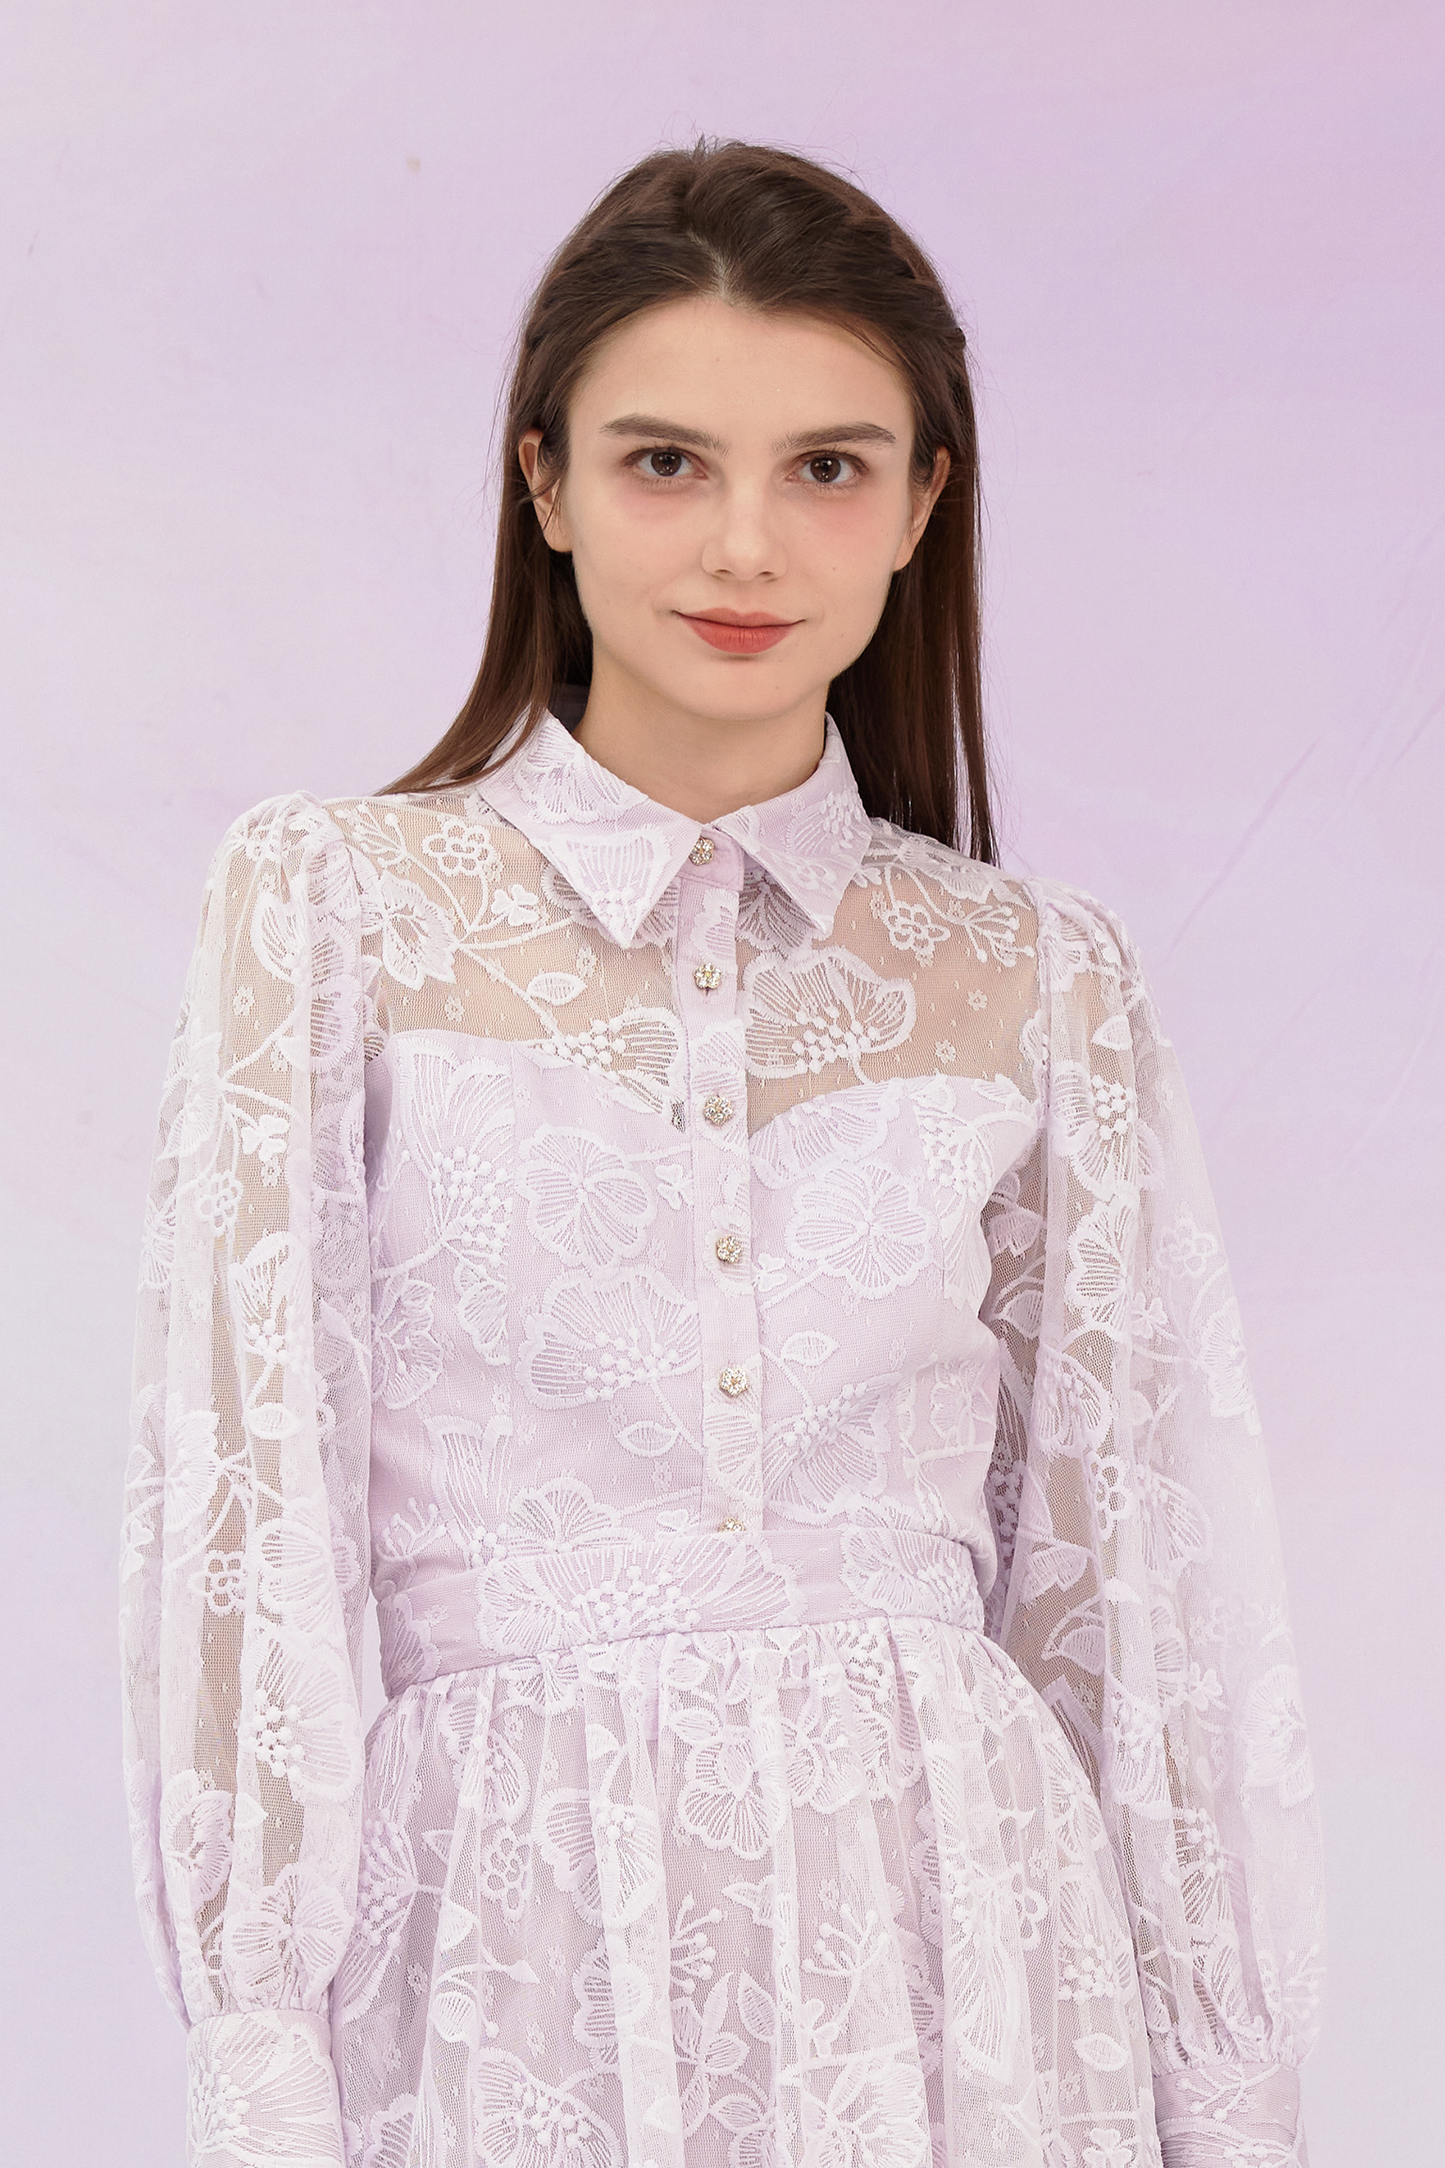 Gioia Lilac Flower Lace Top